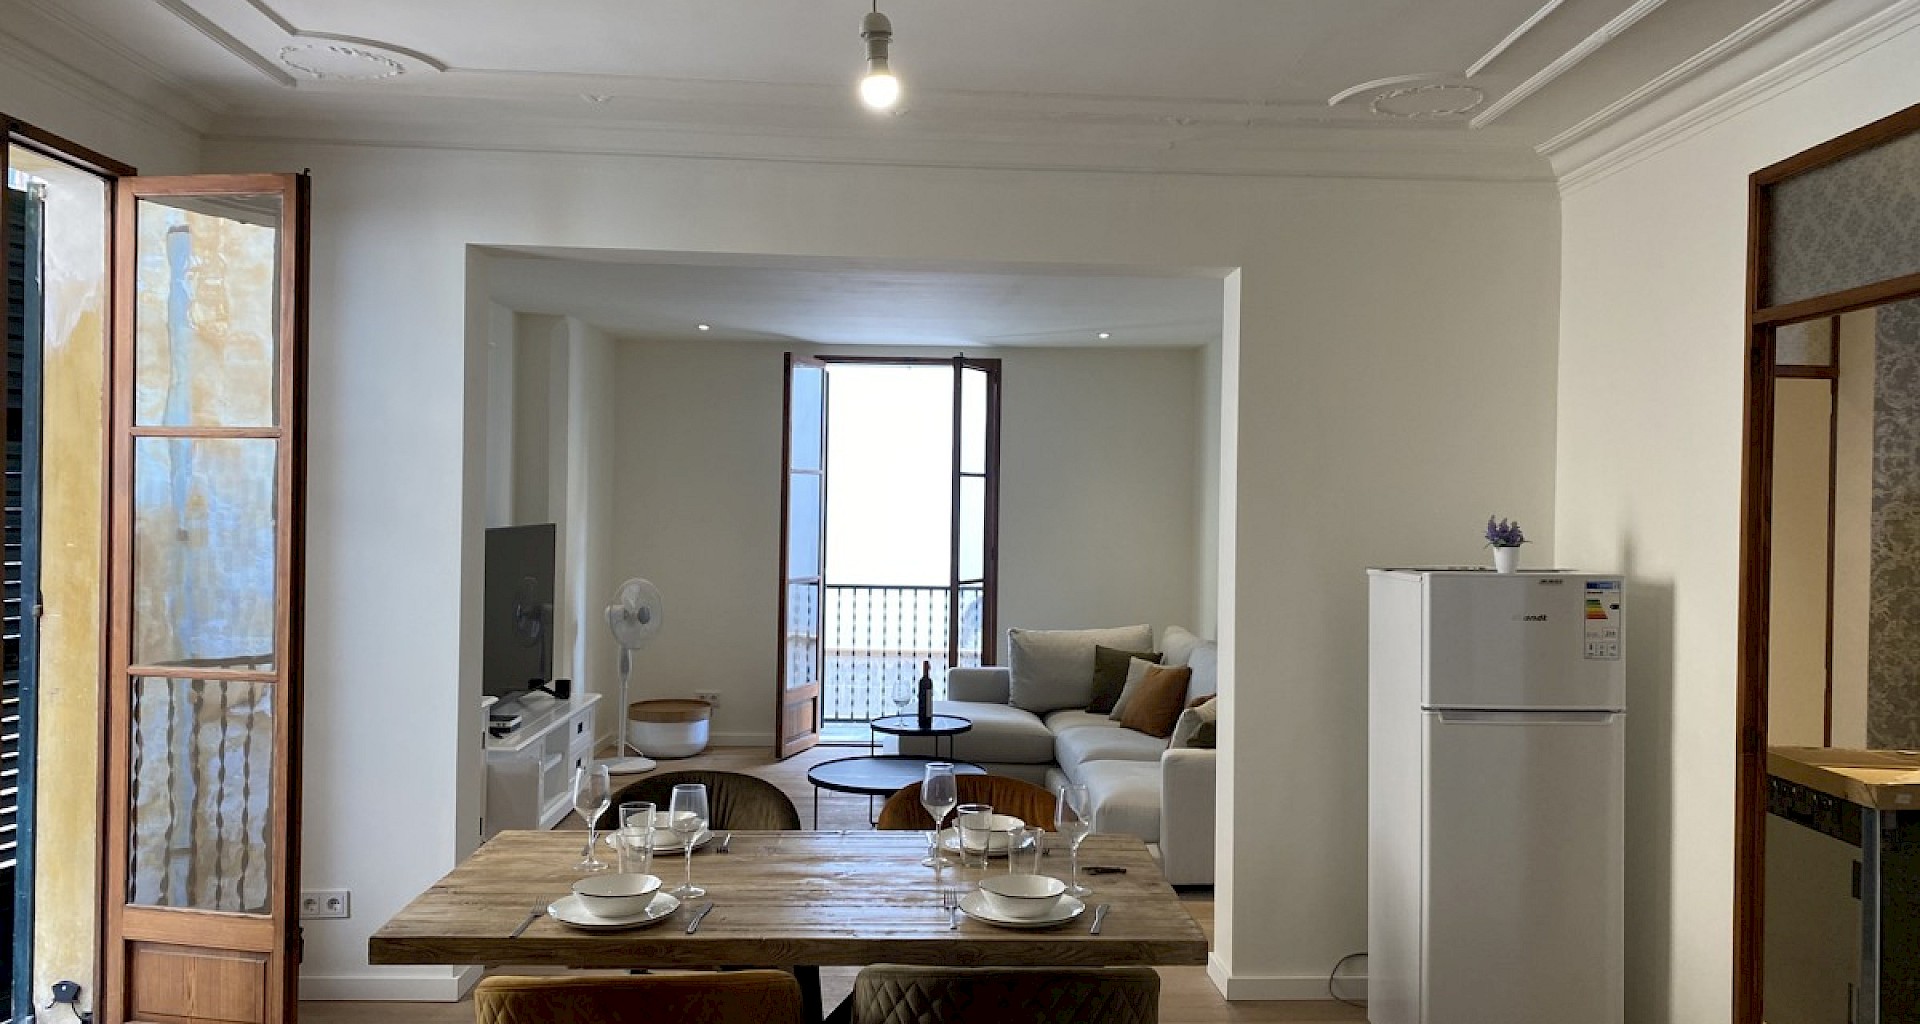 KROHN & LUEDEMANN Modern renovated apartment in Palma old town for sale Wohnung in Palma Altstadt 07